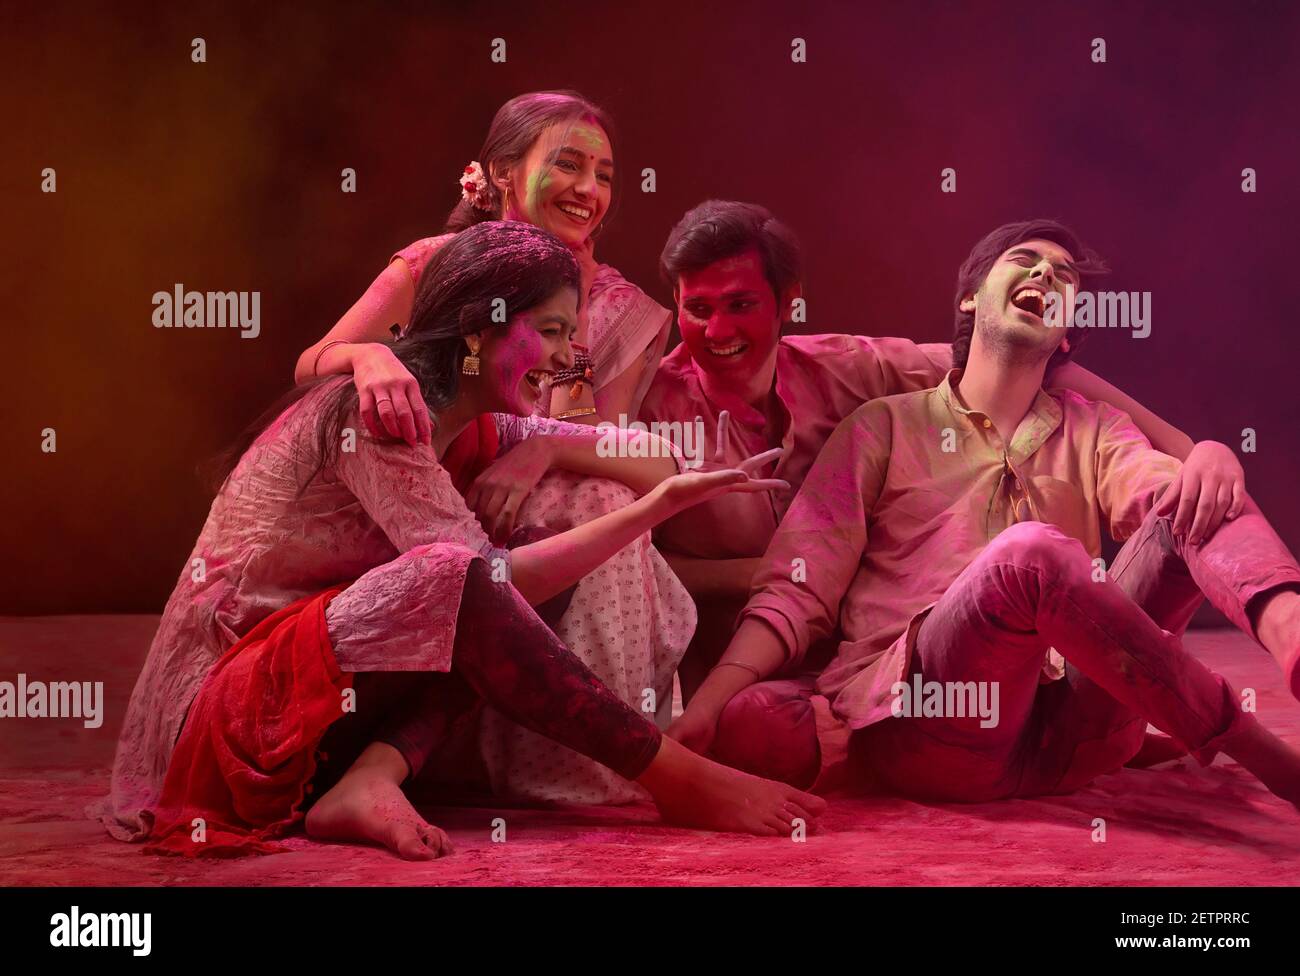 A GROUP OF HAPPY FRIENDS SITTING TOGETHER AND ENJOYING HOLI CELEBRATIONS Stock Photo